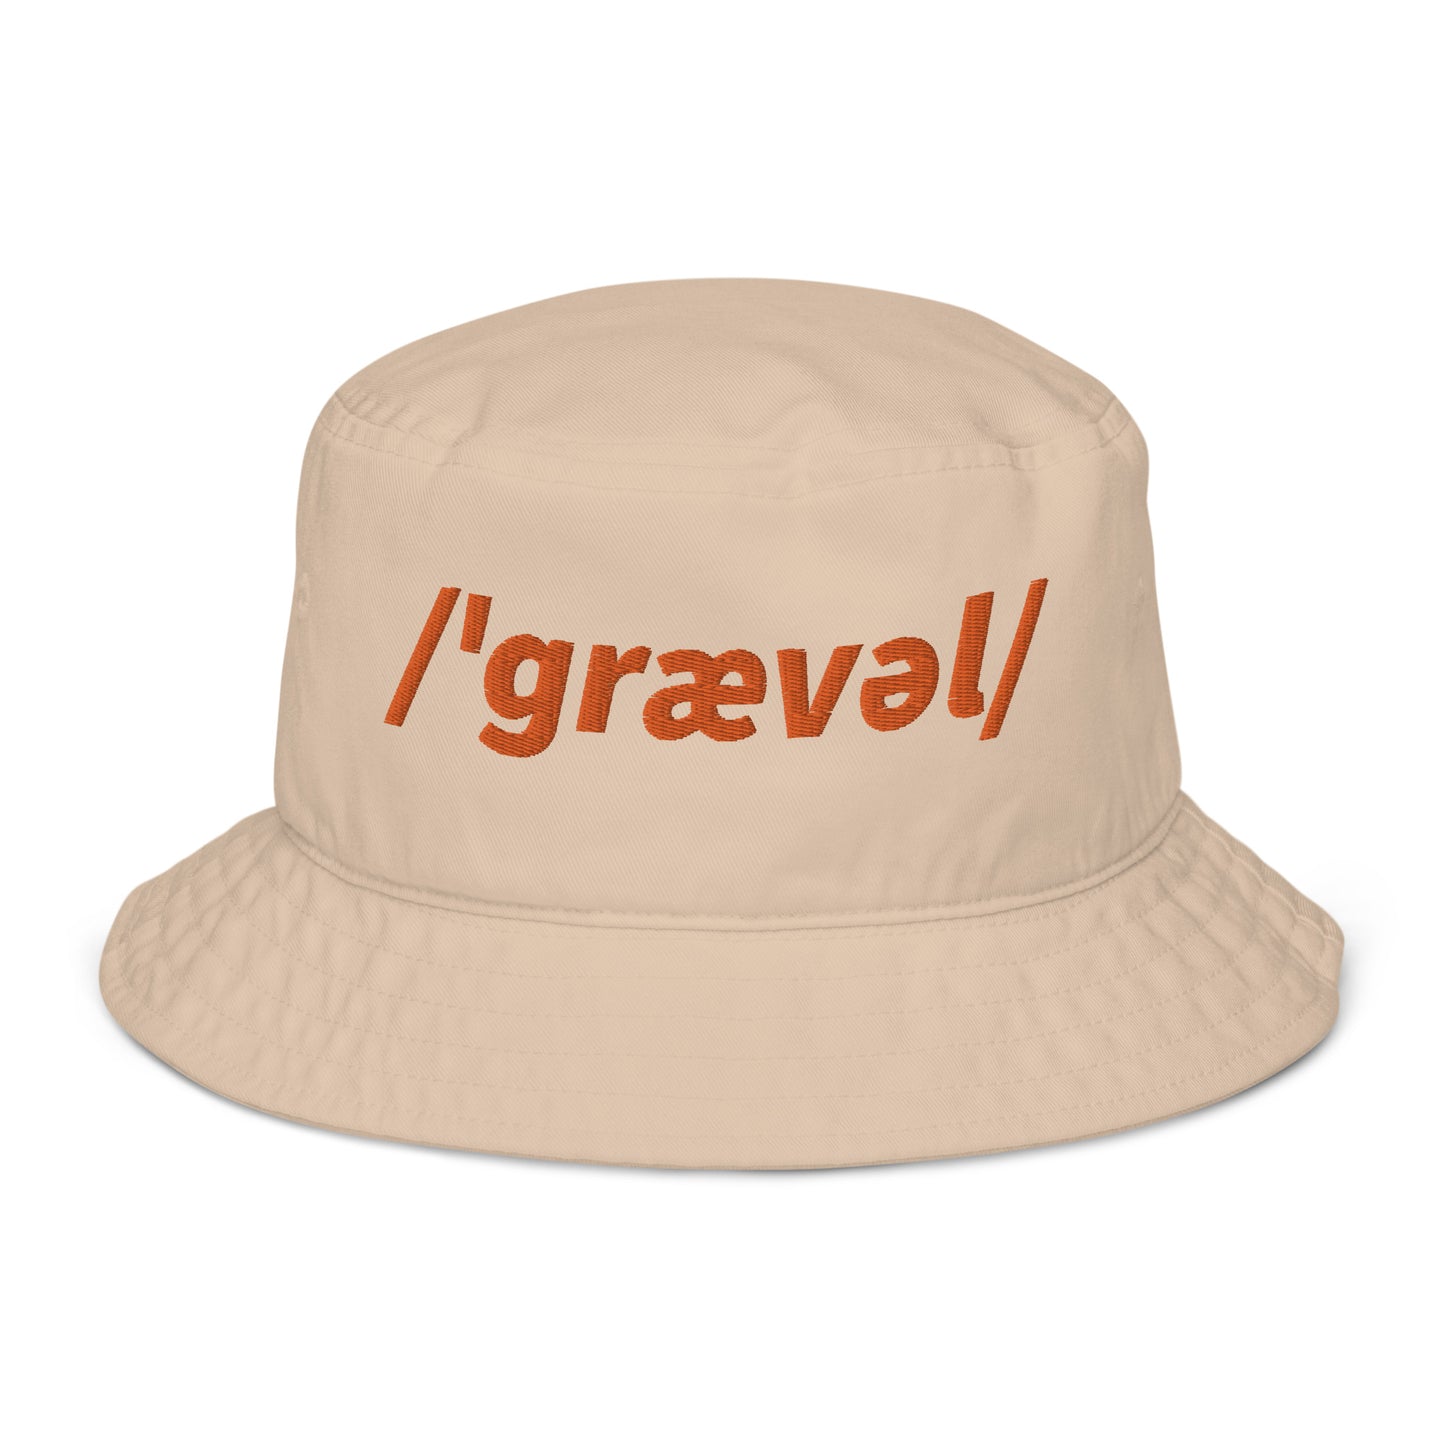 Gravel Cyclist Embroidered Organic Bucket Hat, Phonetic Spelling, Adult